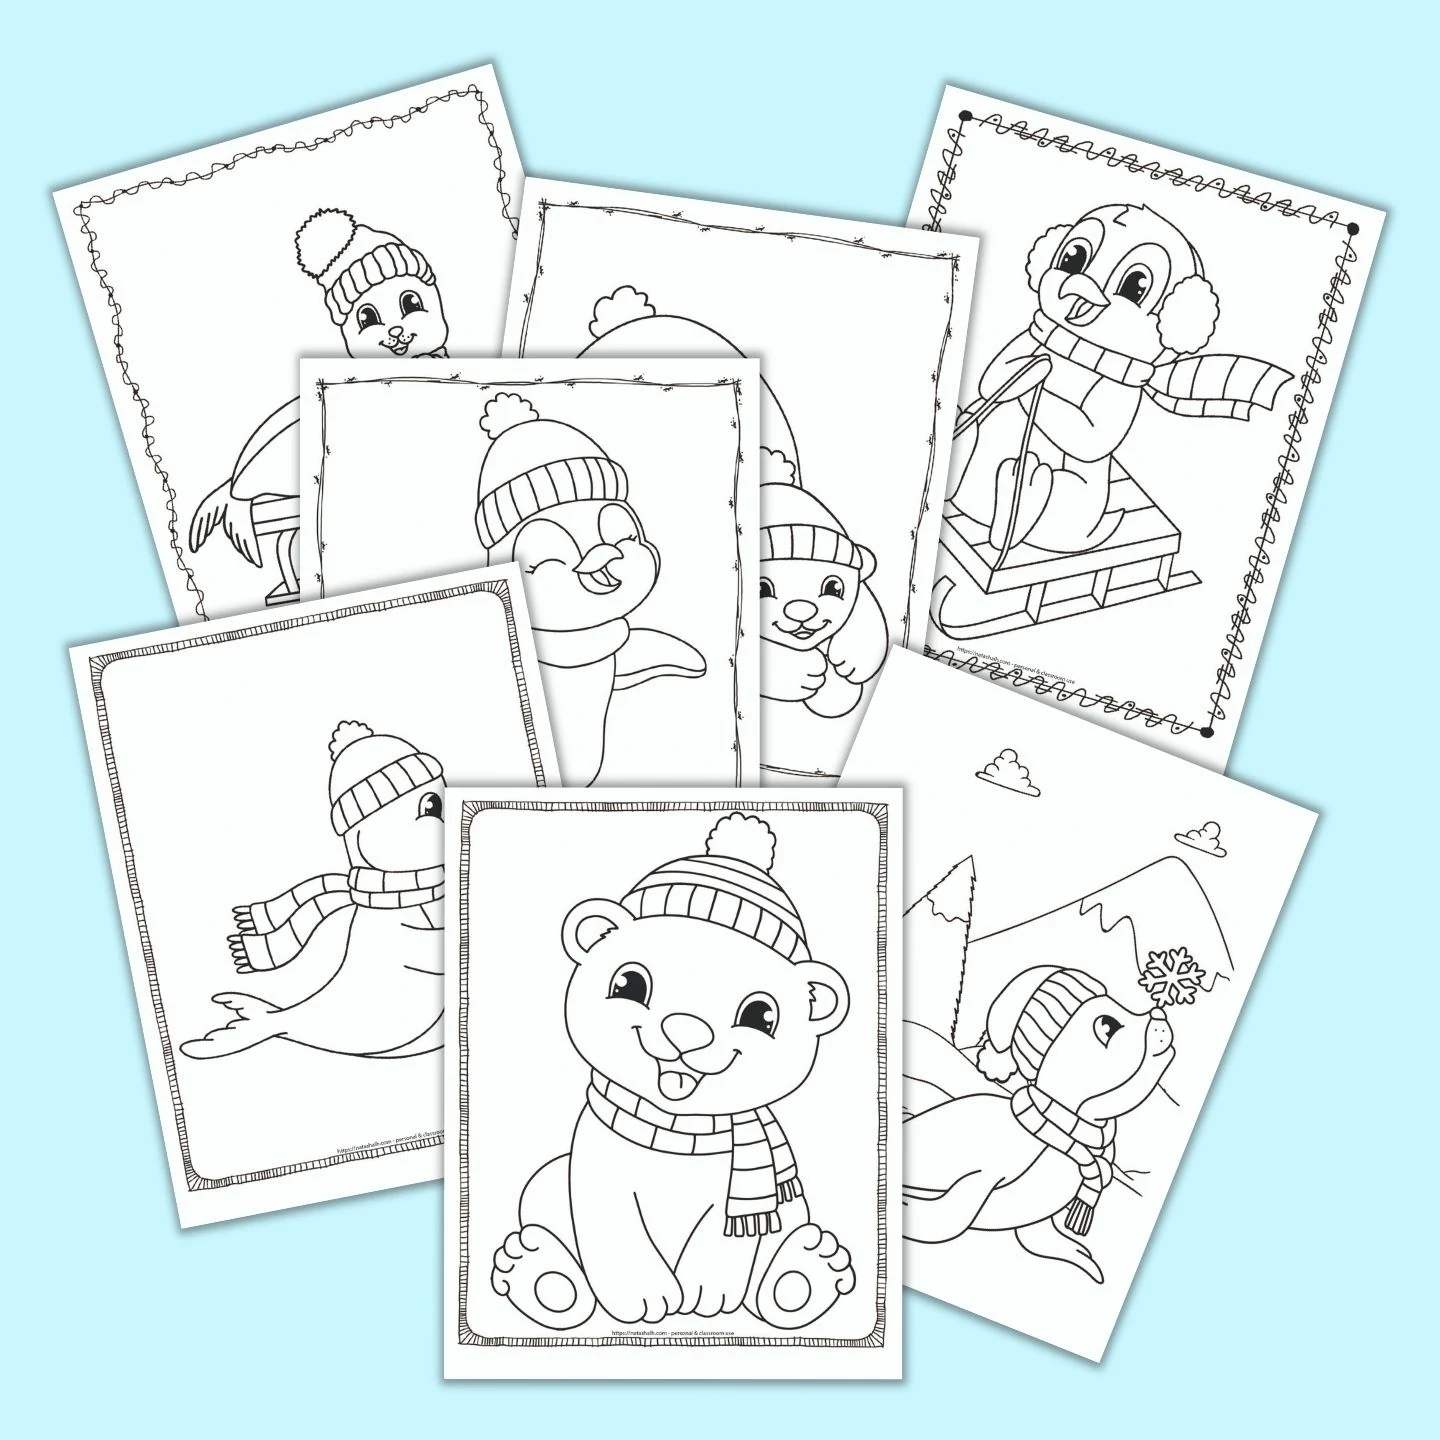 20+ Spring Coloring Pages   Free Printable Spring Adult Coloring ...